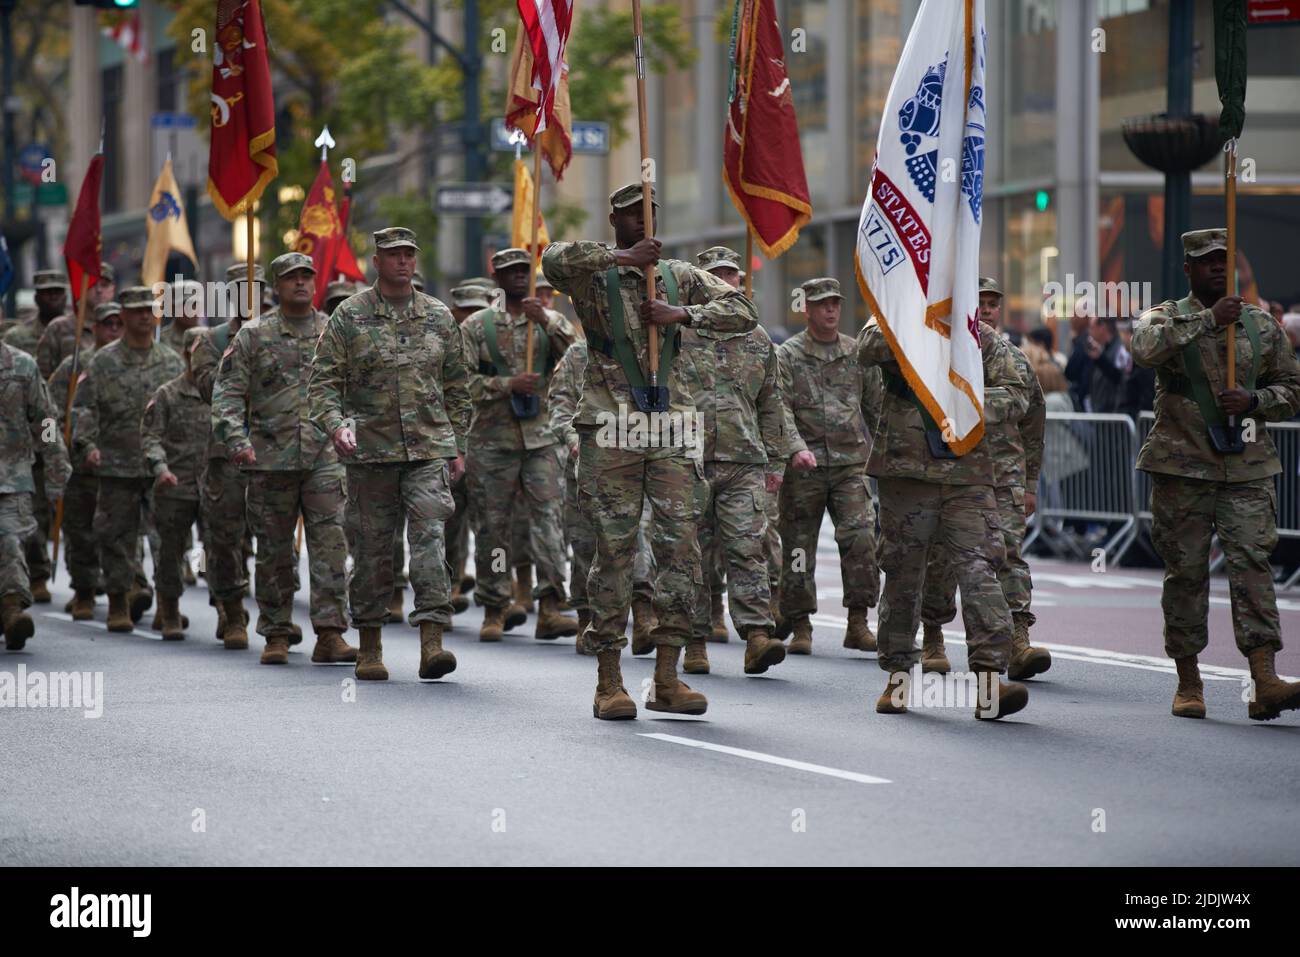 Manhattan, New York,USA - November 11. 2019: 77th Sustainment Brigade. Soldiers marching on Fifth Avenue in NYC. US Military Infantry Stock Photo